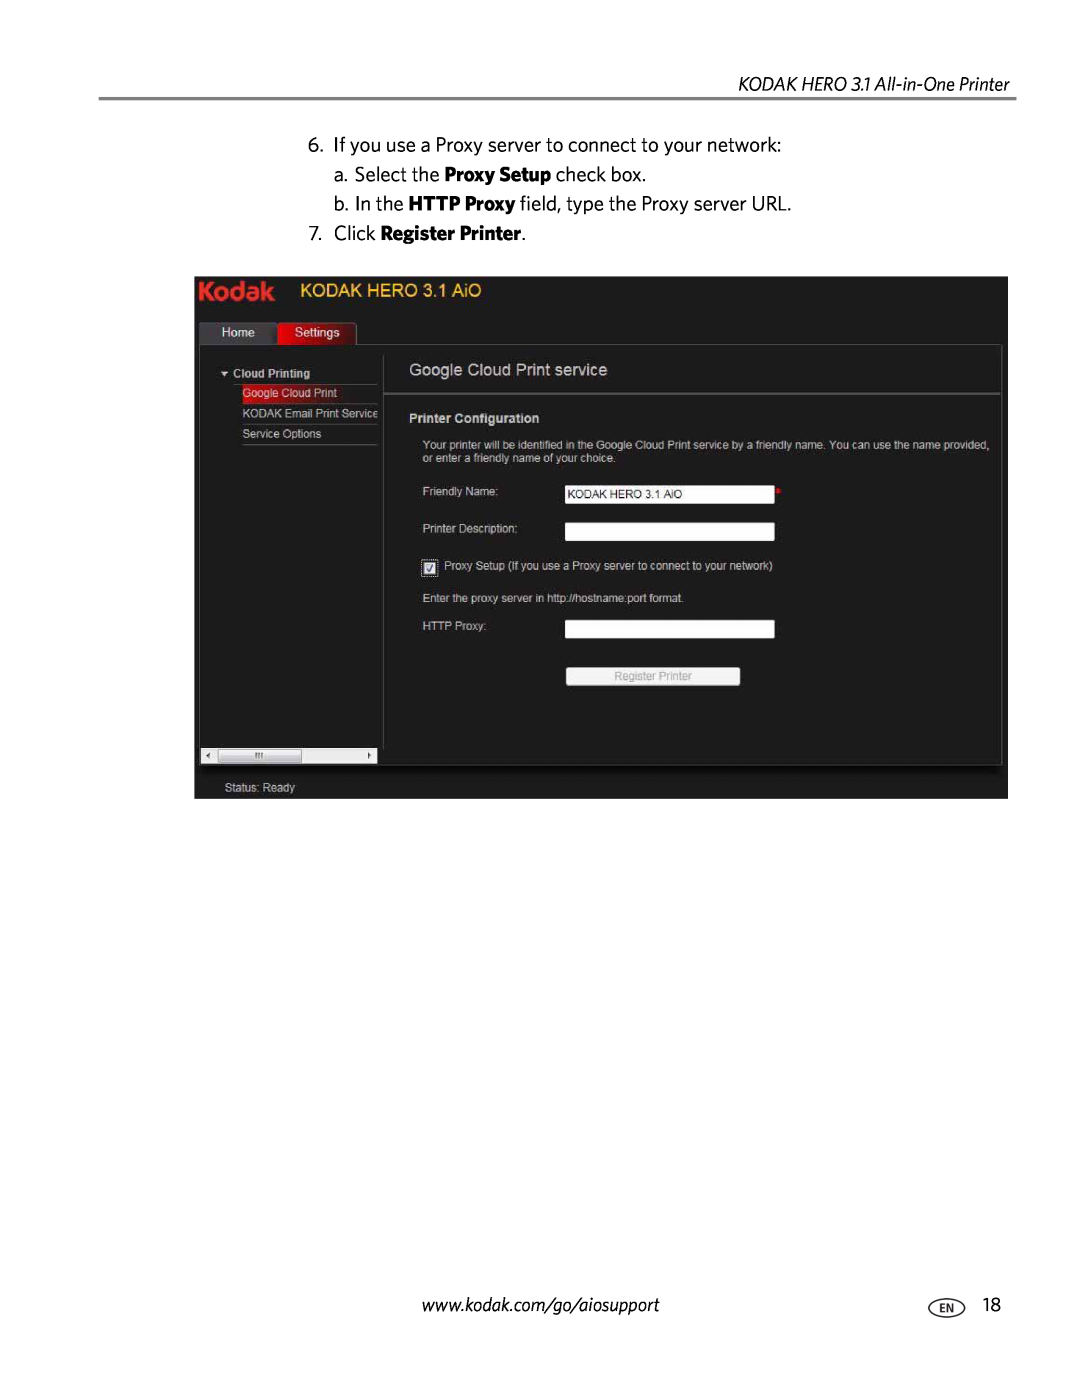 Kodak 3.1 manual Click Register Printer, If you use a Proxy server to connect to your network 